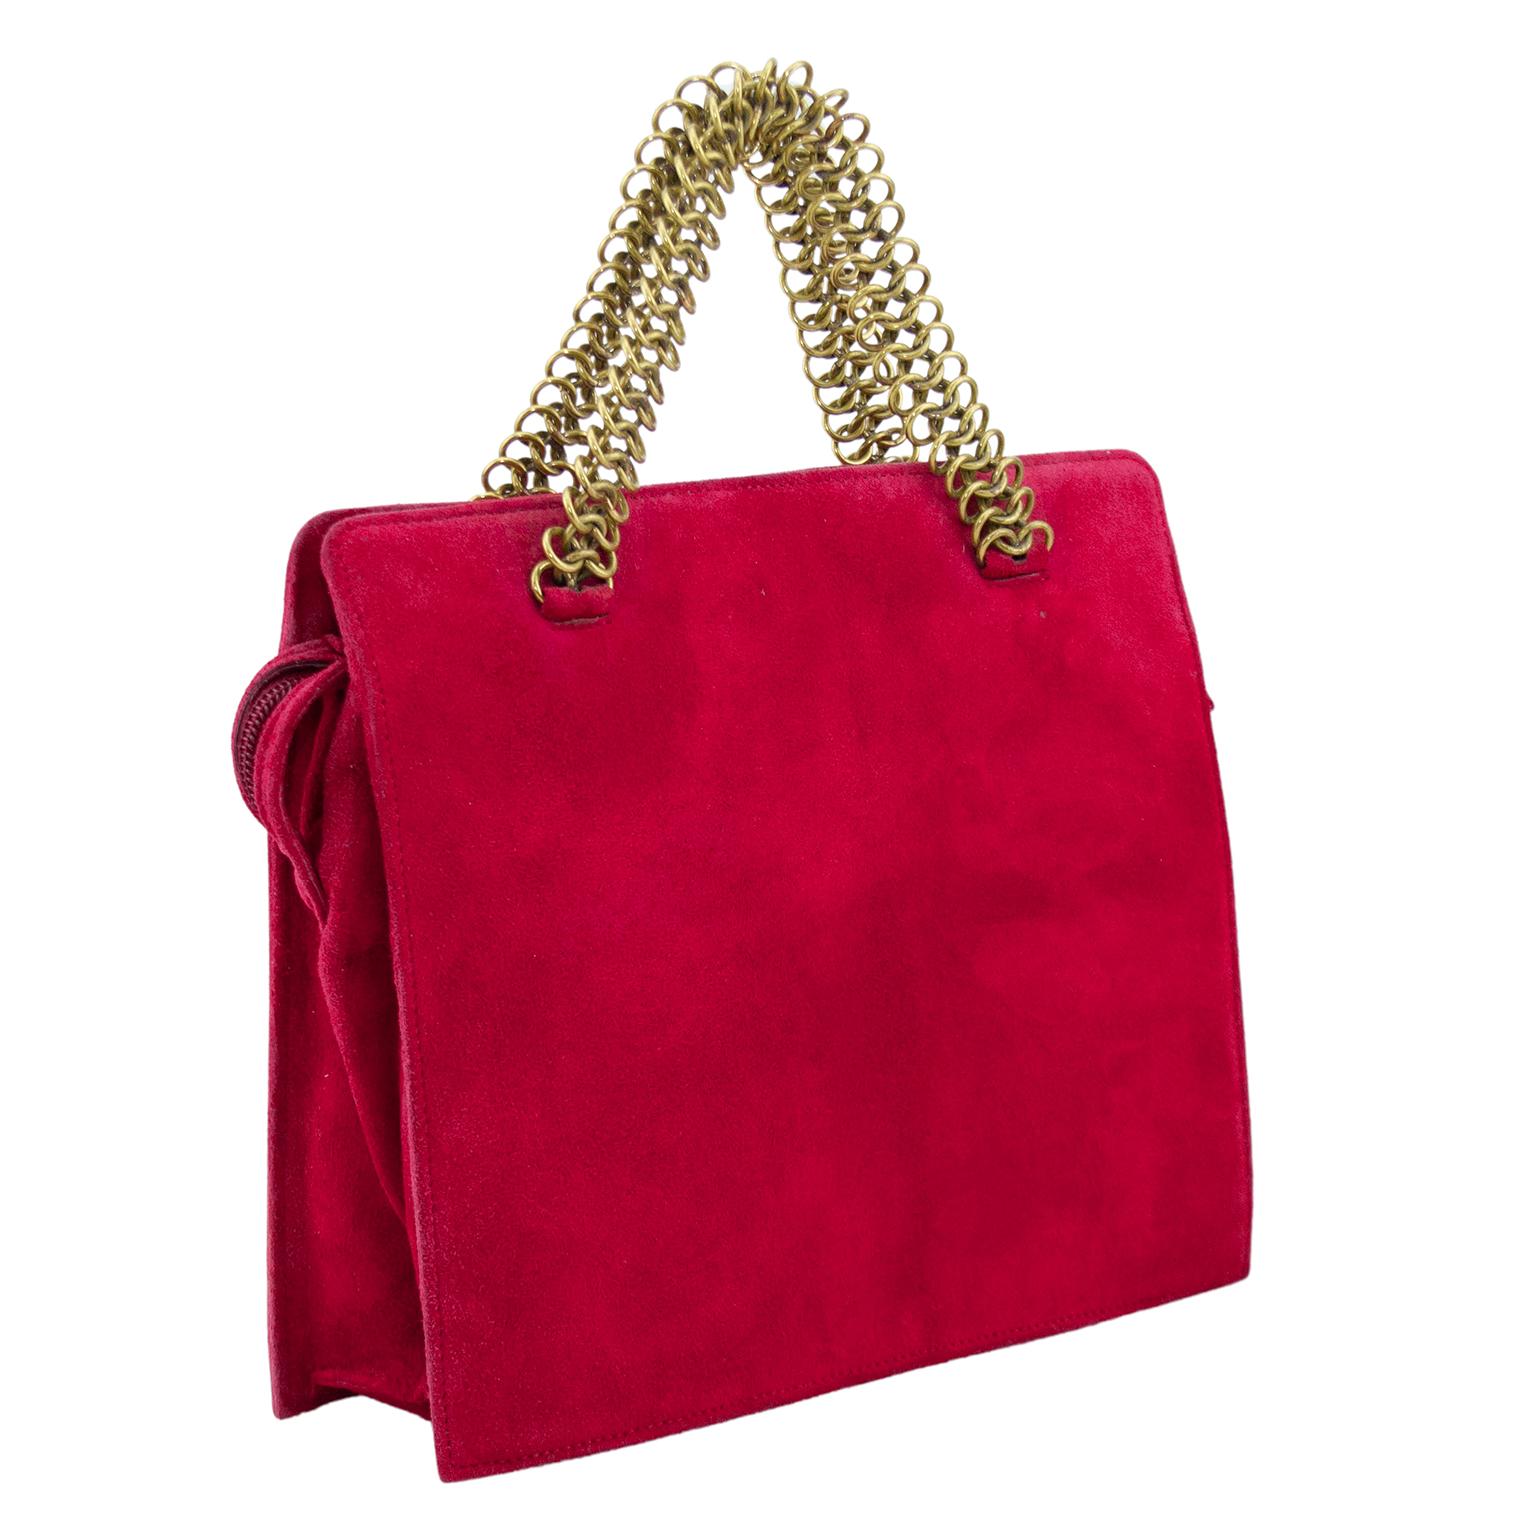 Prada square hand bag from the 1990s. Red suede with gold chain link top handles. Suede can read red or magenta pink depending on the lighting. Zipper closure across the top with suede pull tab and Prada blind stamp on front. Black all over branded